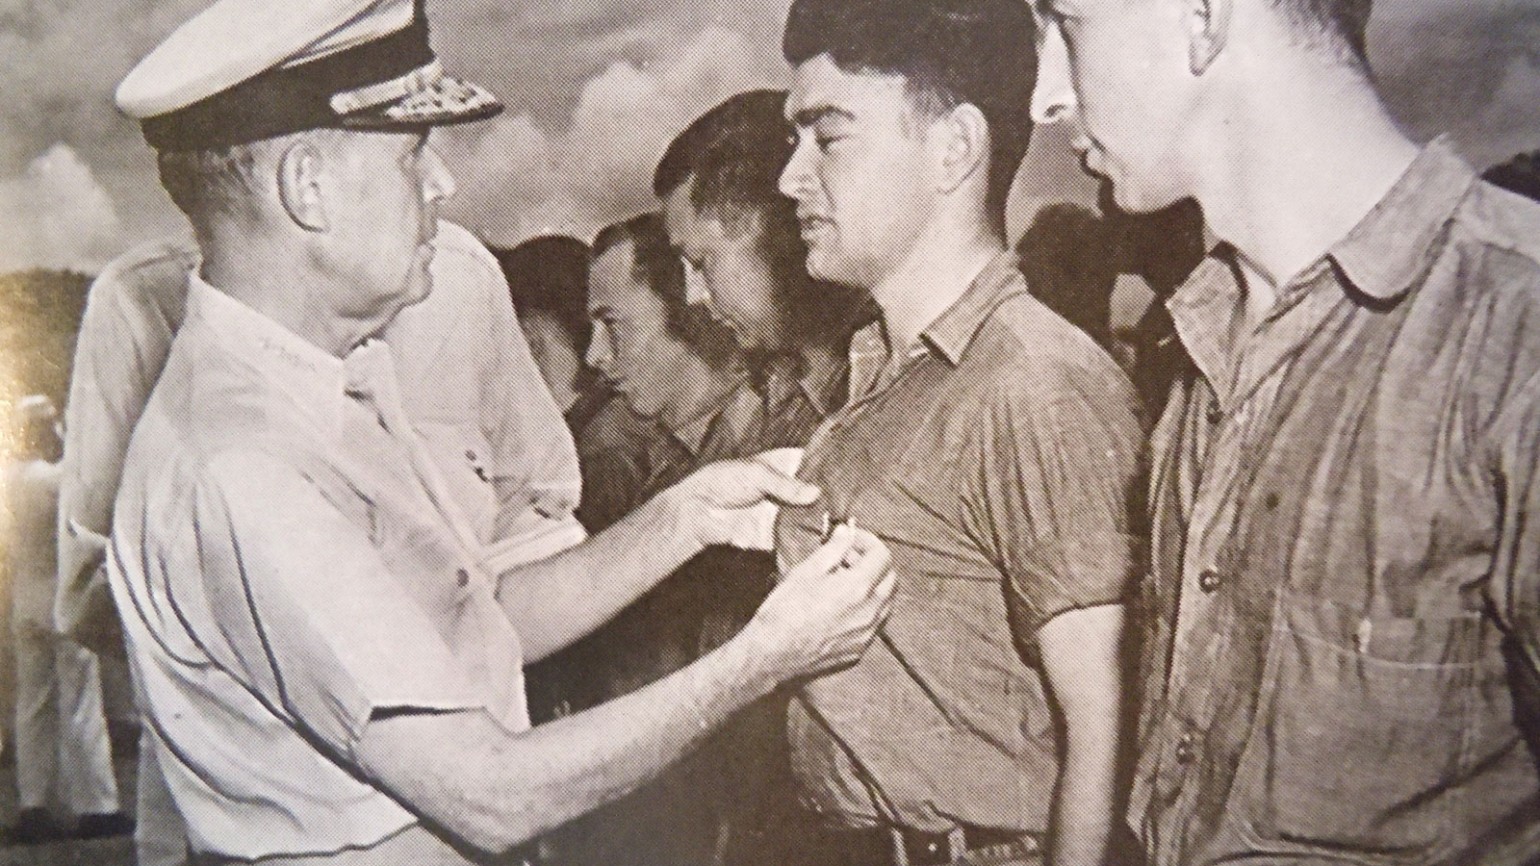 Admiral Spruance presenting the surviving crew members with the Purple Heart. Photo courtesy of Alfred J. Sedivi Collection - USNI.